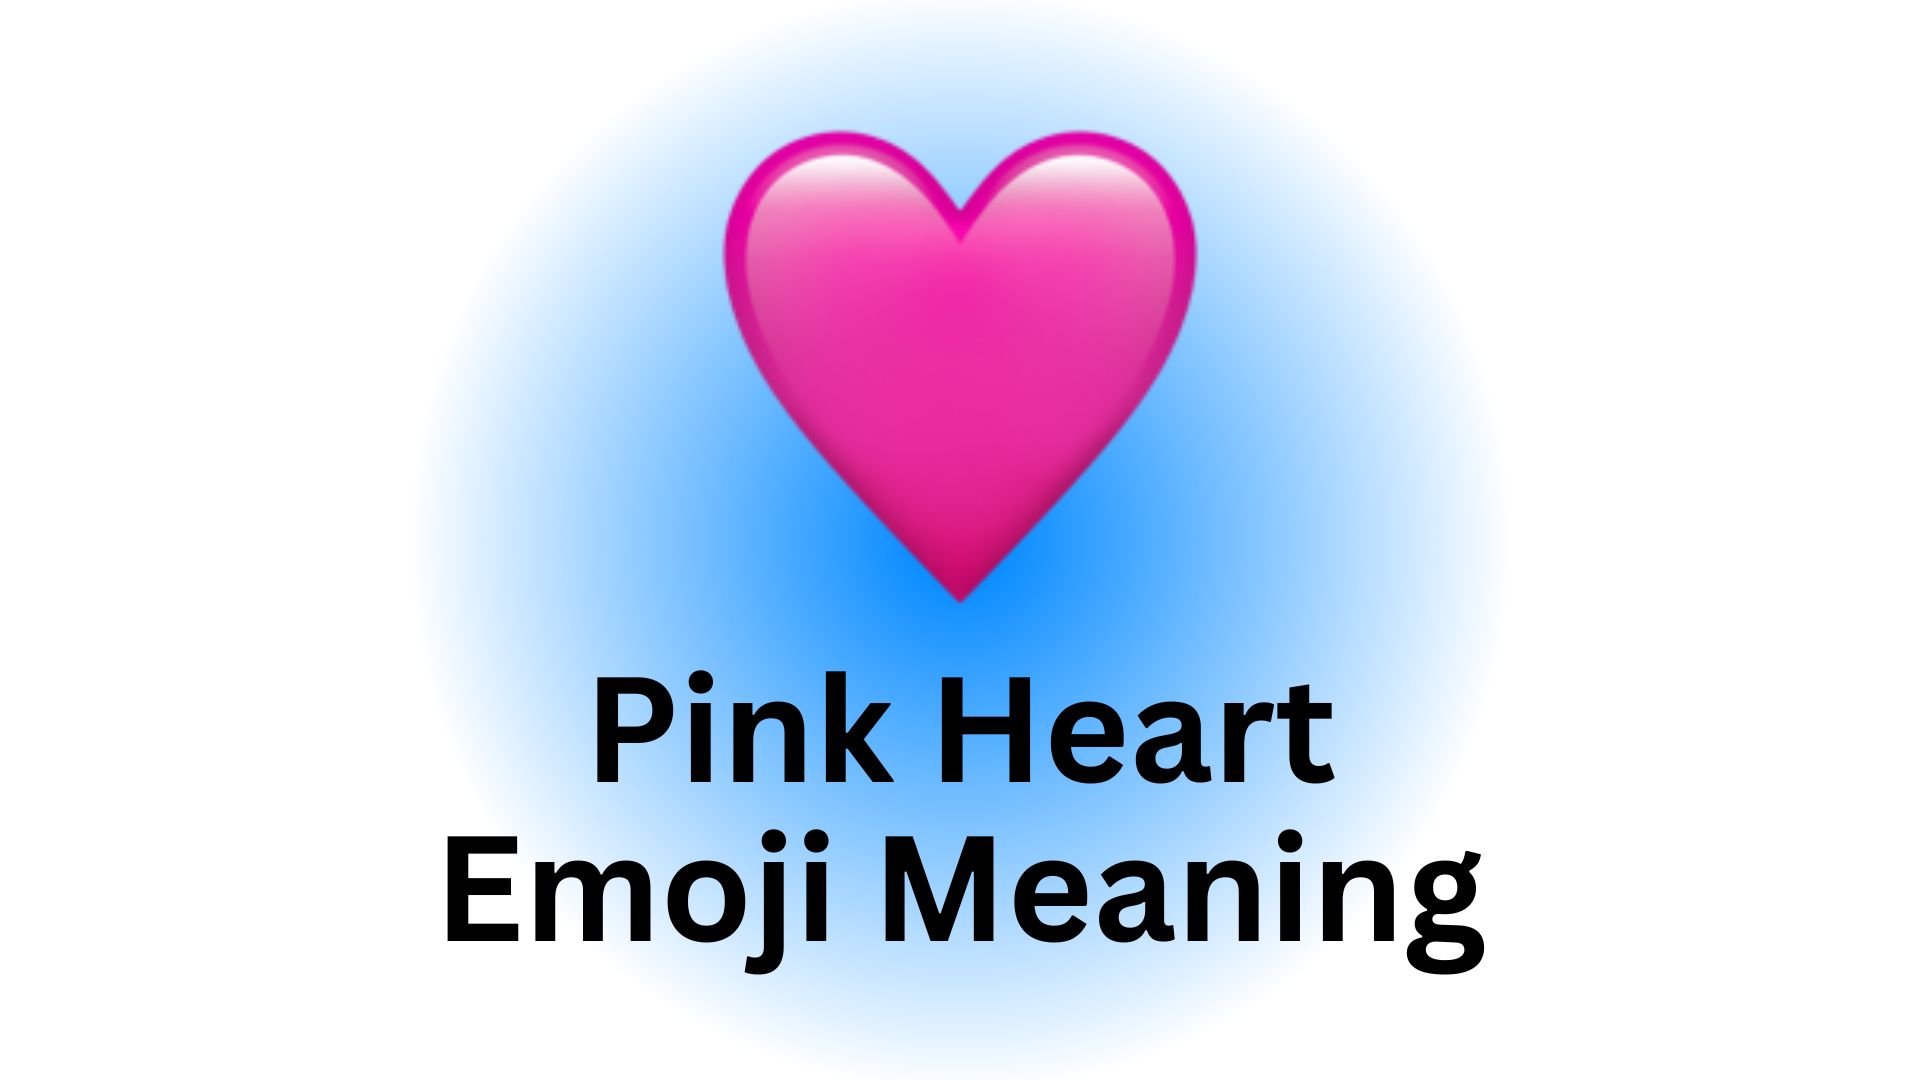 Pink Heart Emoji Meaning